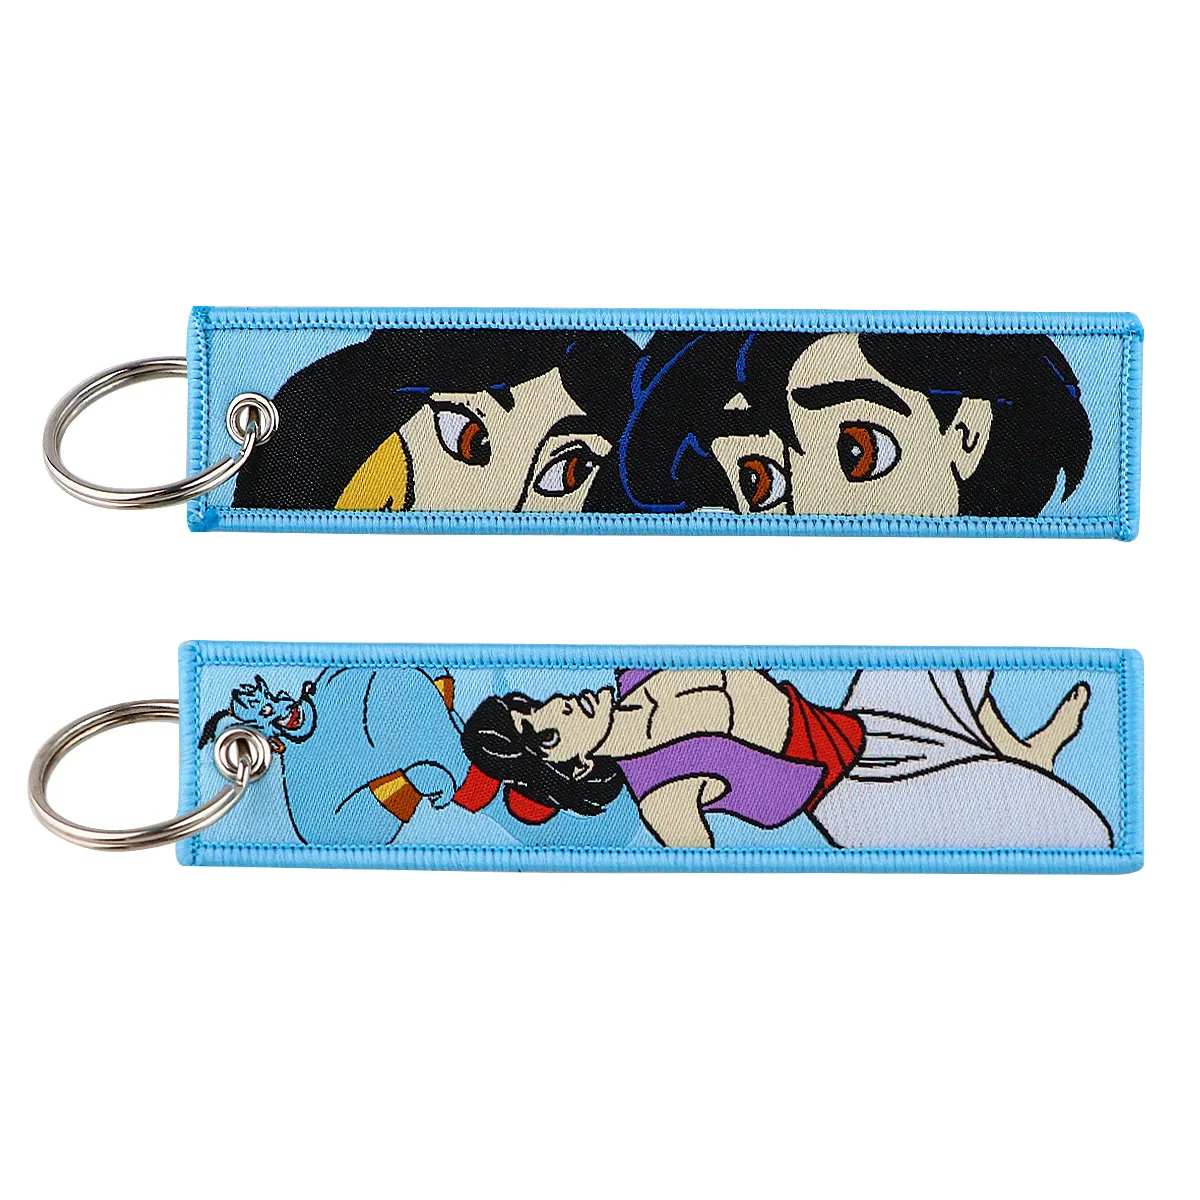 Keychains & Lanyards Various Types Of Cartoon Cool Key Tag Embroidery Fobs For Motorcycles Cars Bag Backpack Keychain Fashion Ring Gi Otskf